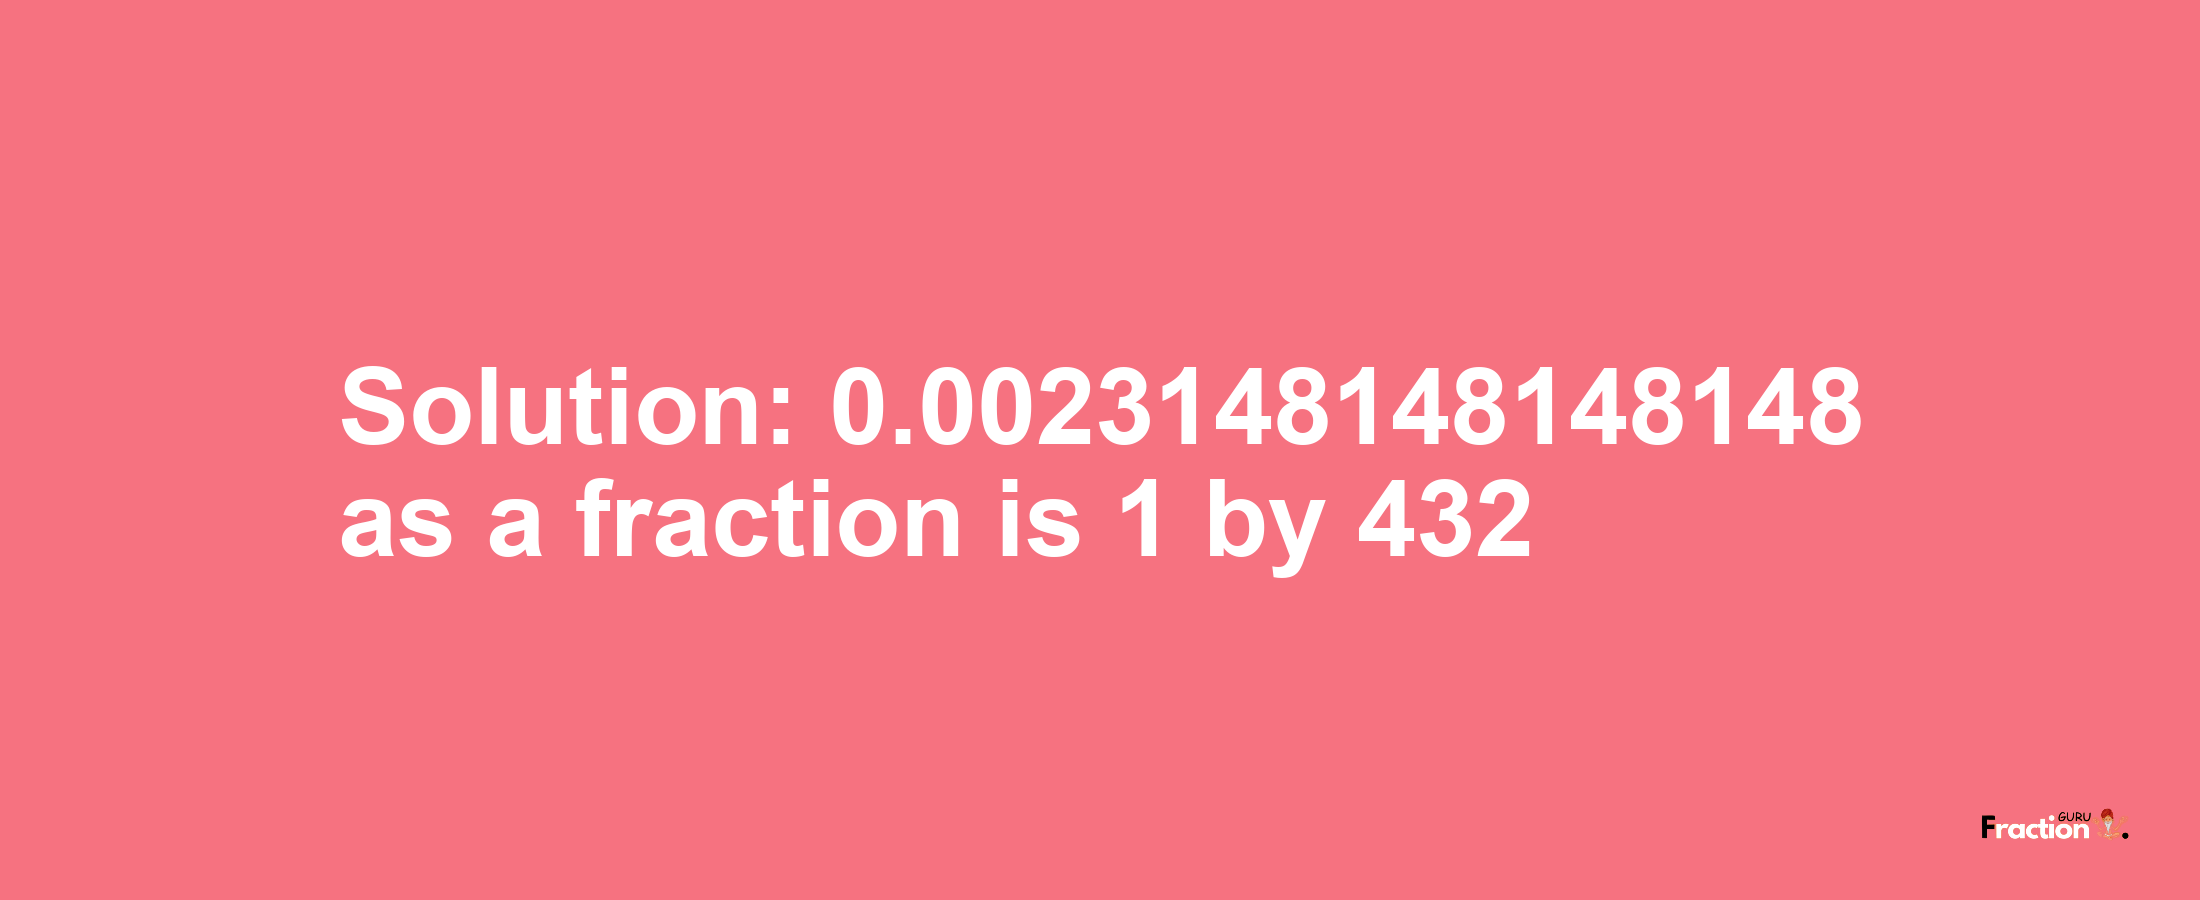 Solution:0.0023148148148148 as a fraction is 1/432